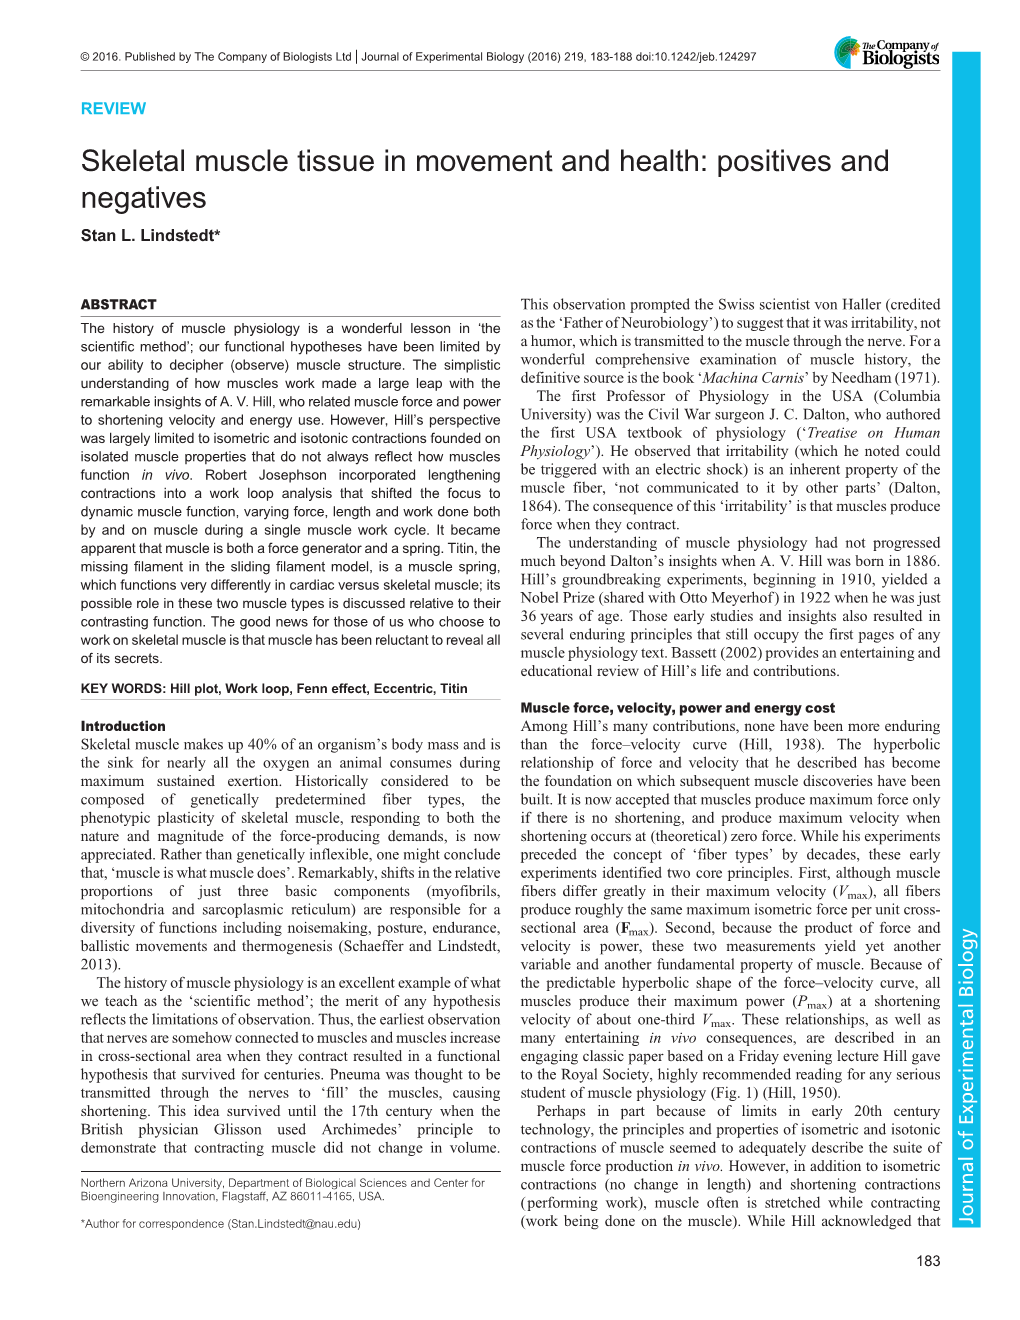 Skeletal Muscle Tissue in Movement and Health: Positives and Negatives Stan L